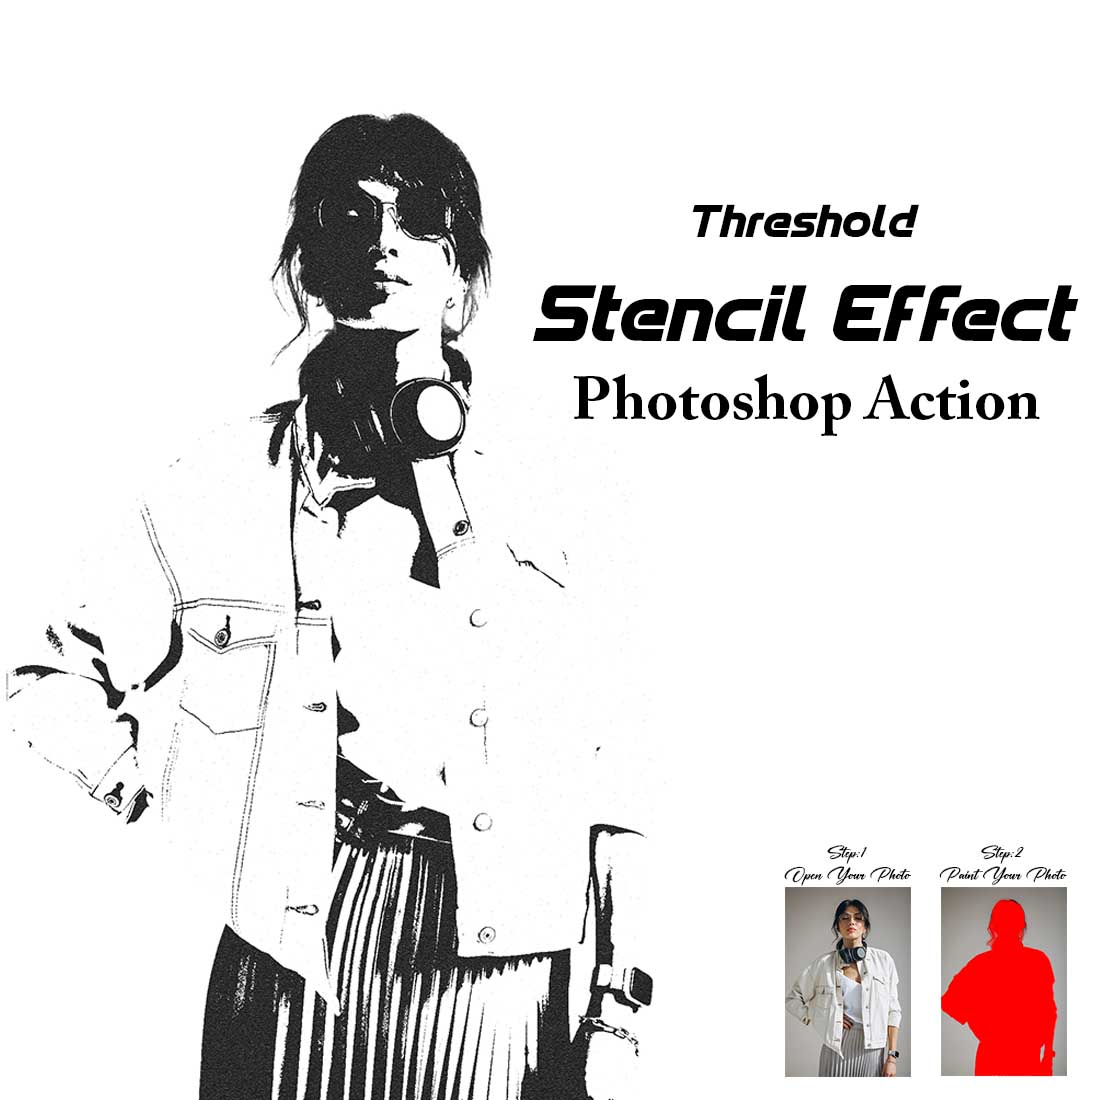 Threshold Stencil Effect Photoshop Action cover image.